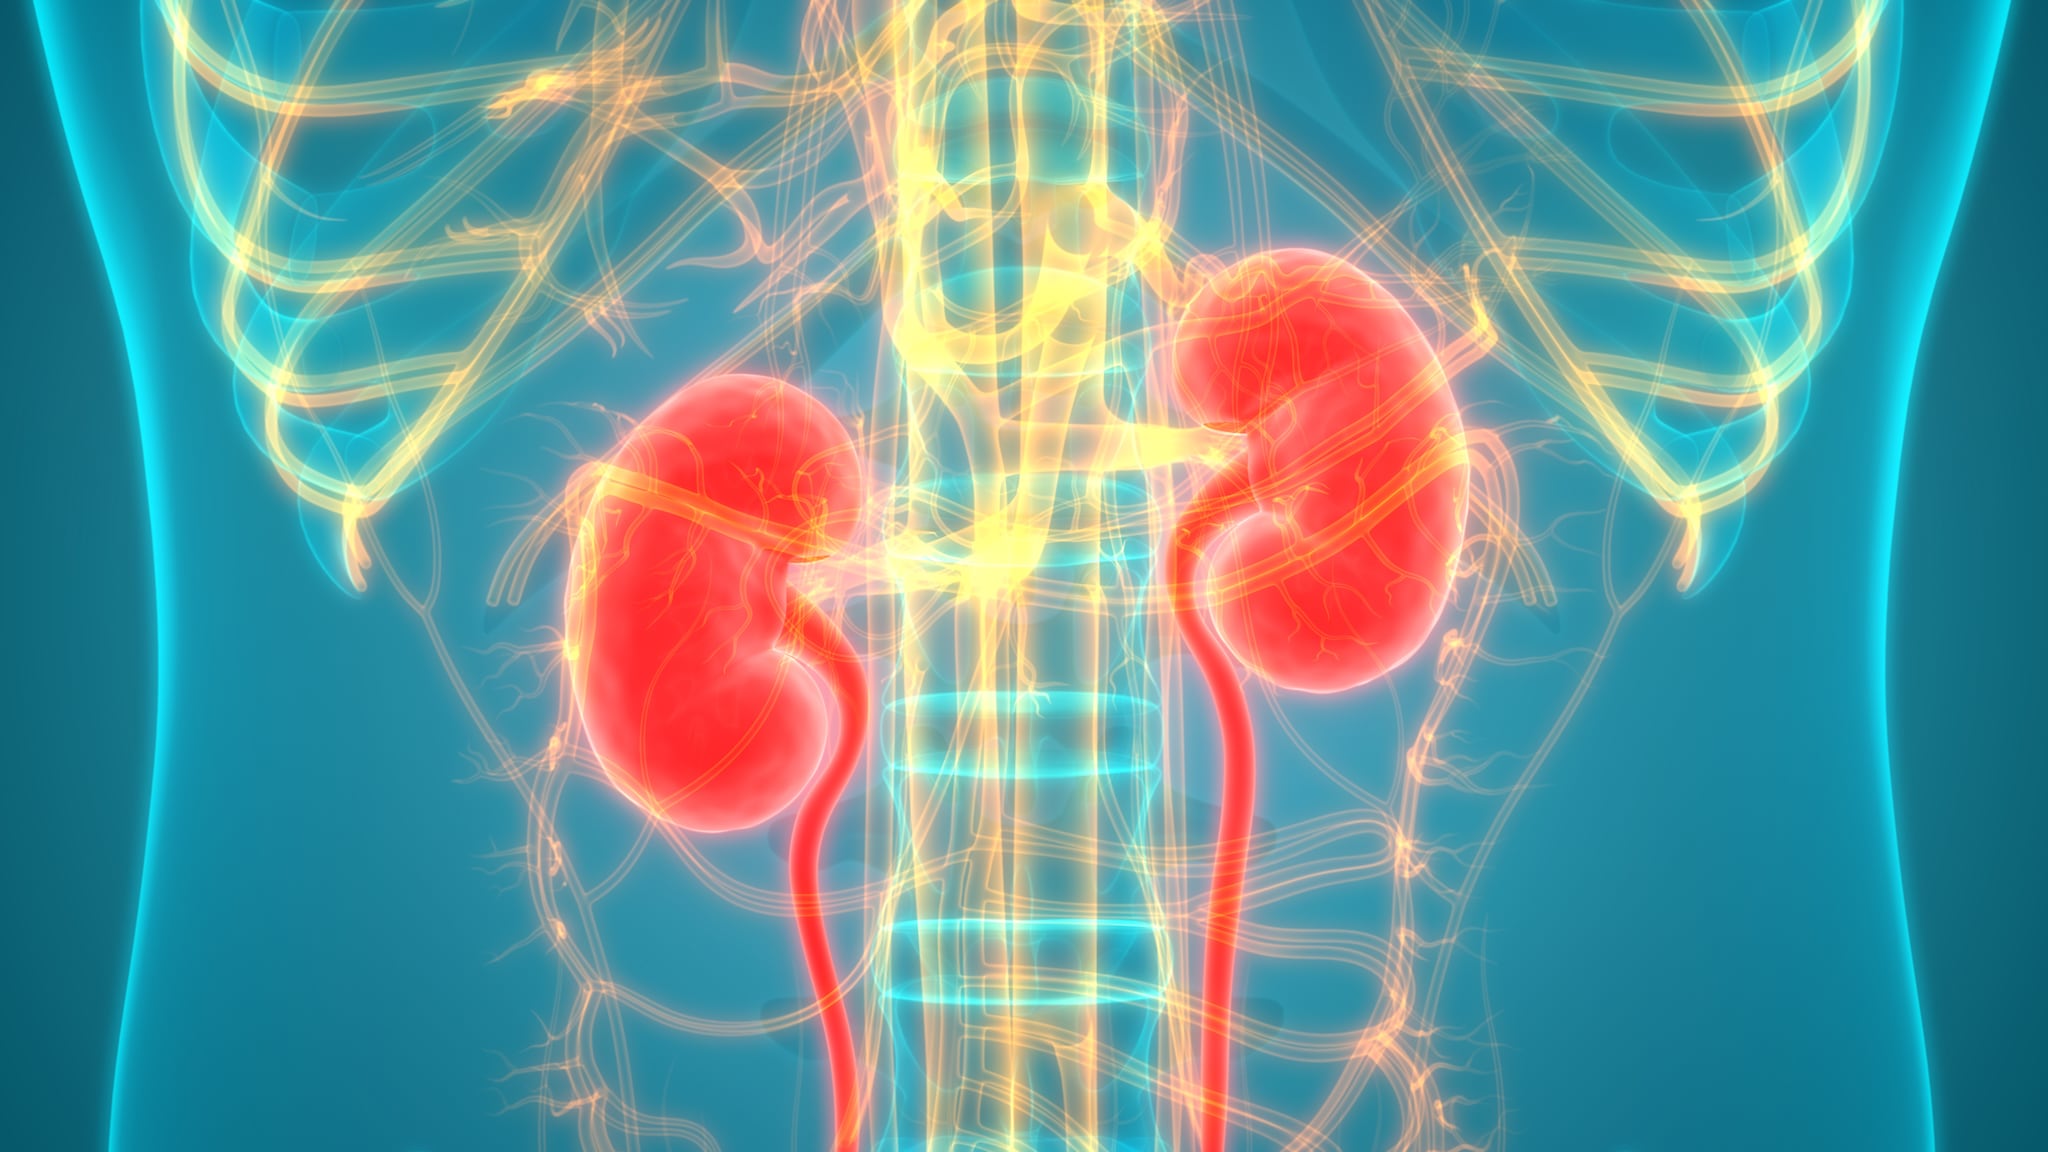 xray image of upper body with kidneys highlighted